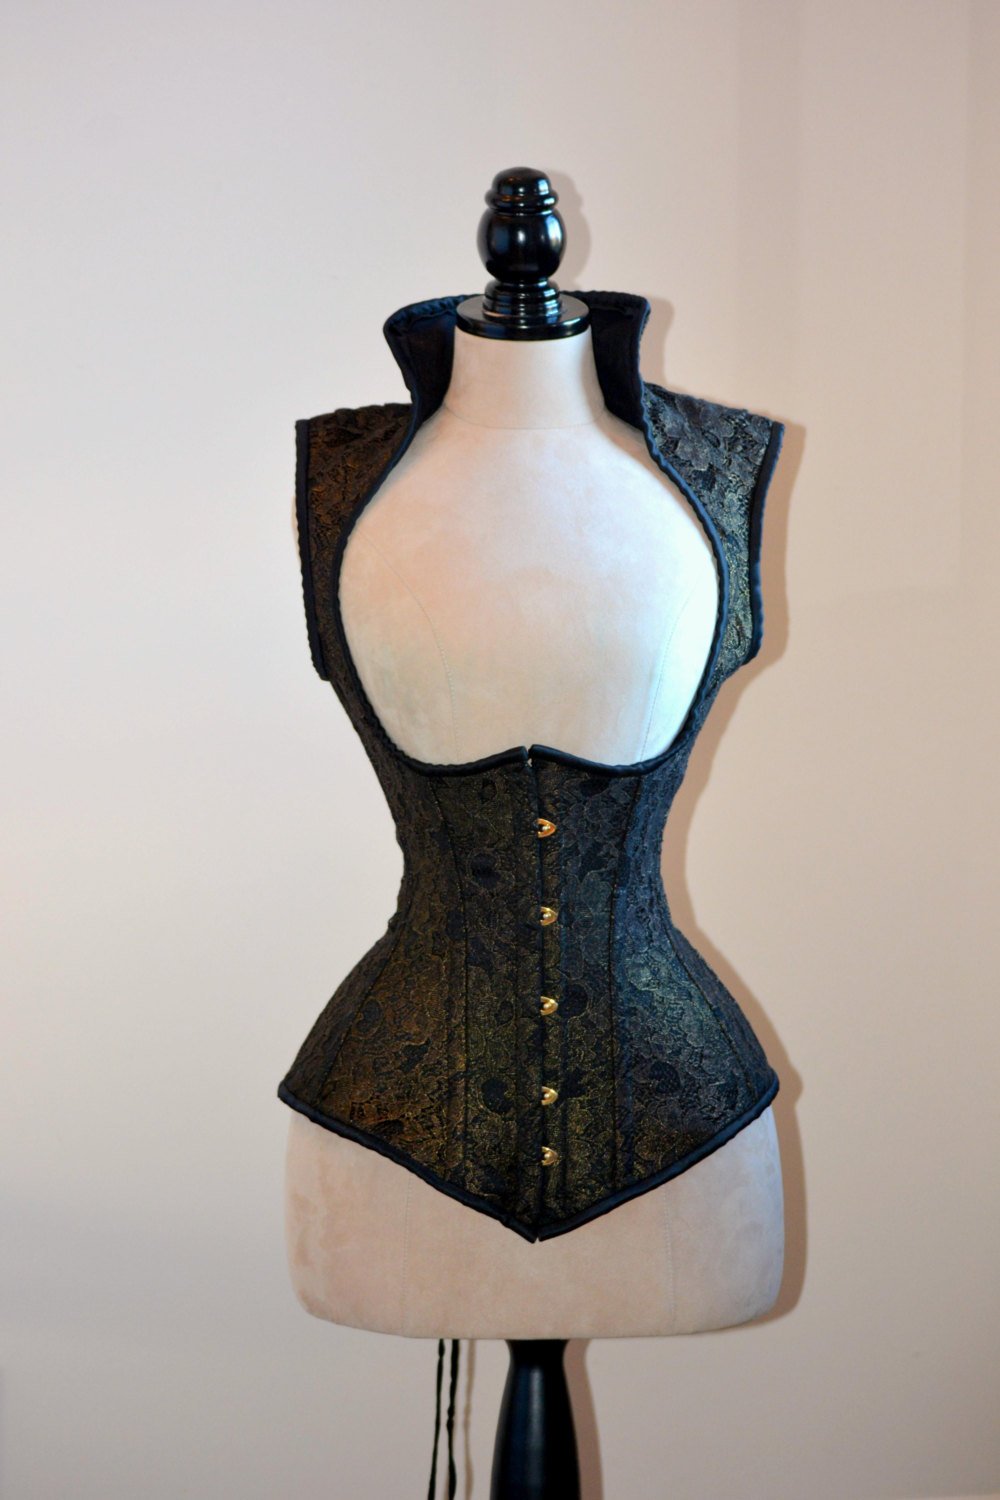 Get Your Very Own Victorian Corset Right Now At Affordable Rates